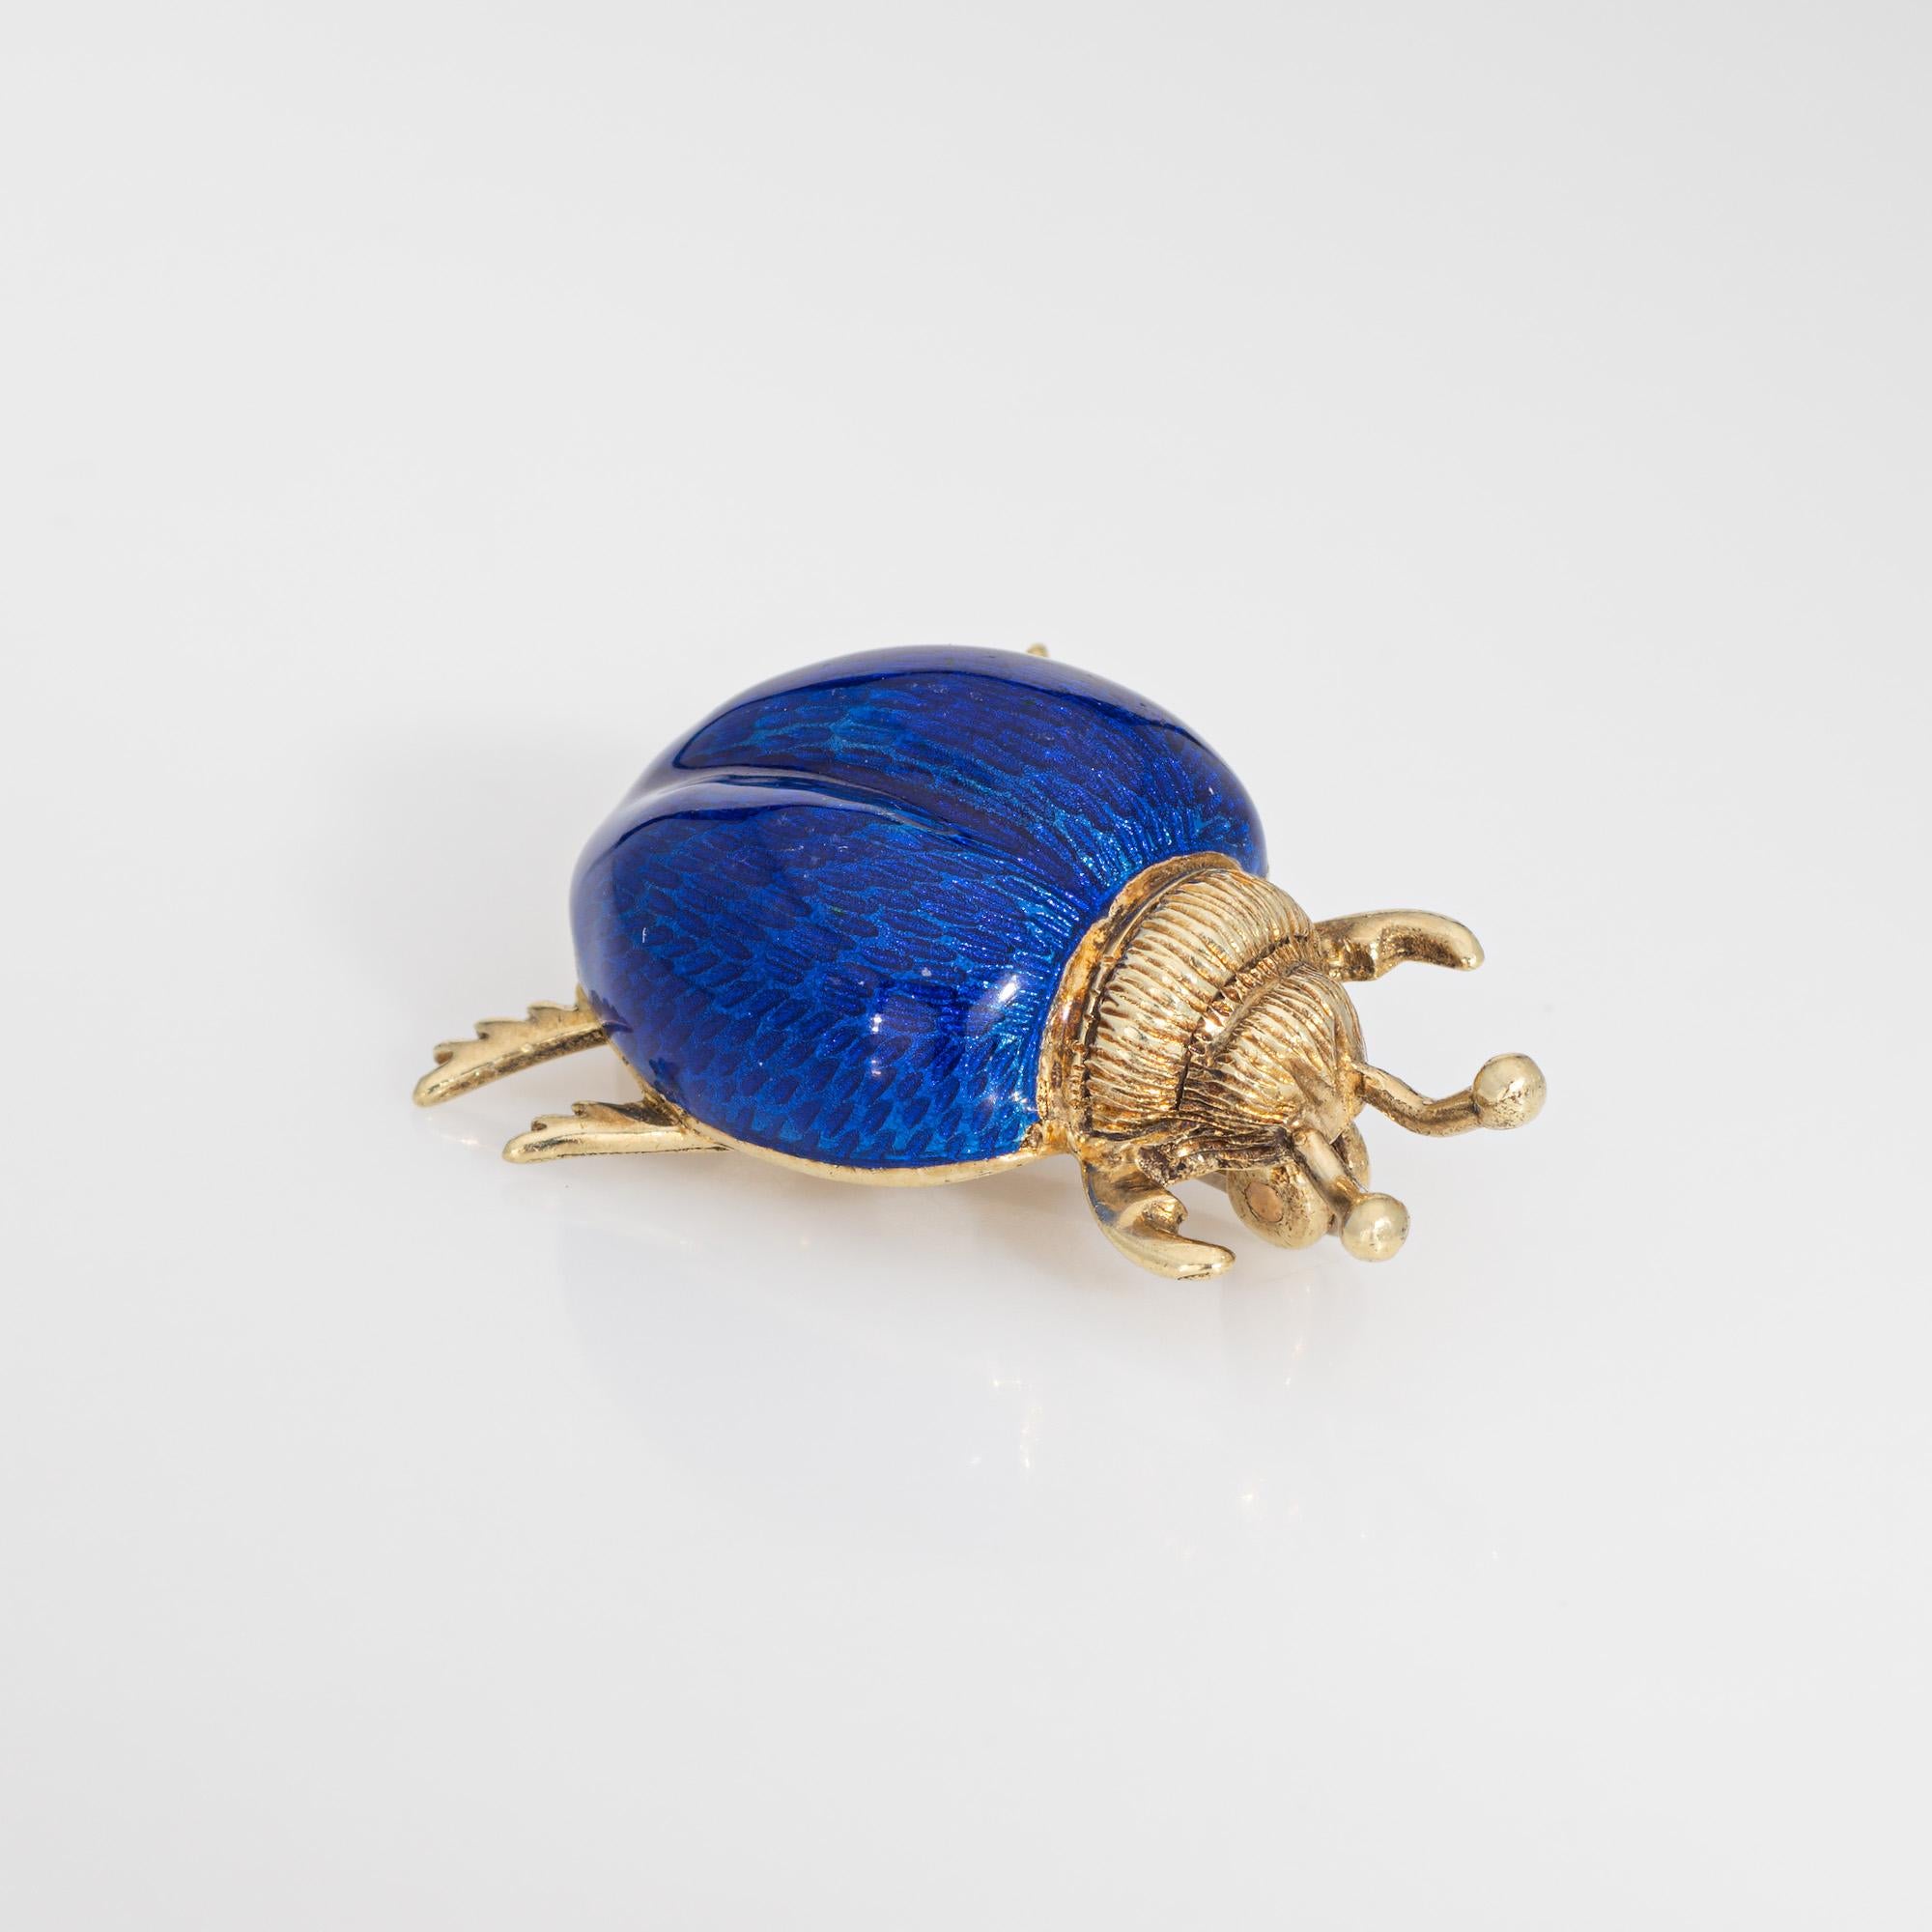 Finely detailed vintage beetle brooch, crafted in 14 karat yellow gold.  

The finely detailed beetle features vibrant royal blue enamel to the back, with textured antennae and claws. Simple and sweet, the beetle is ideal worn on a lapel or shirt